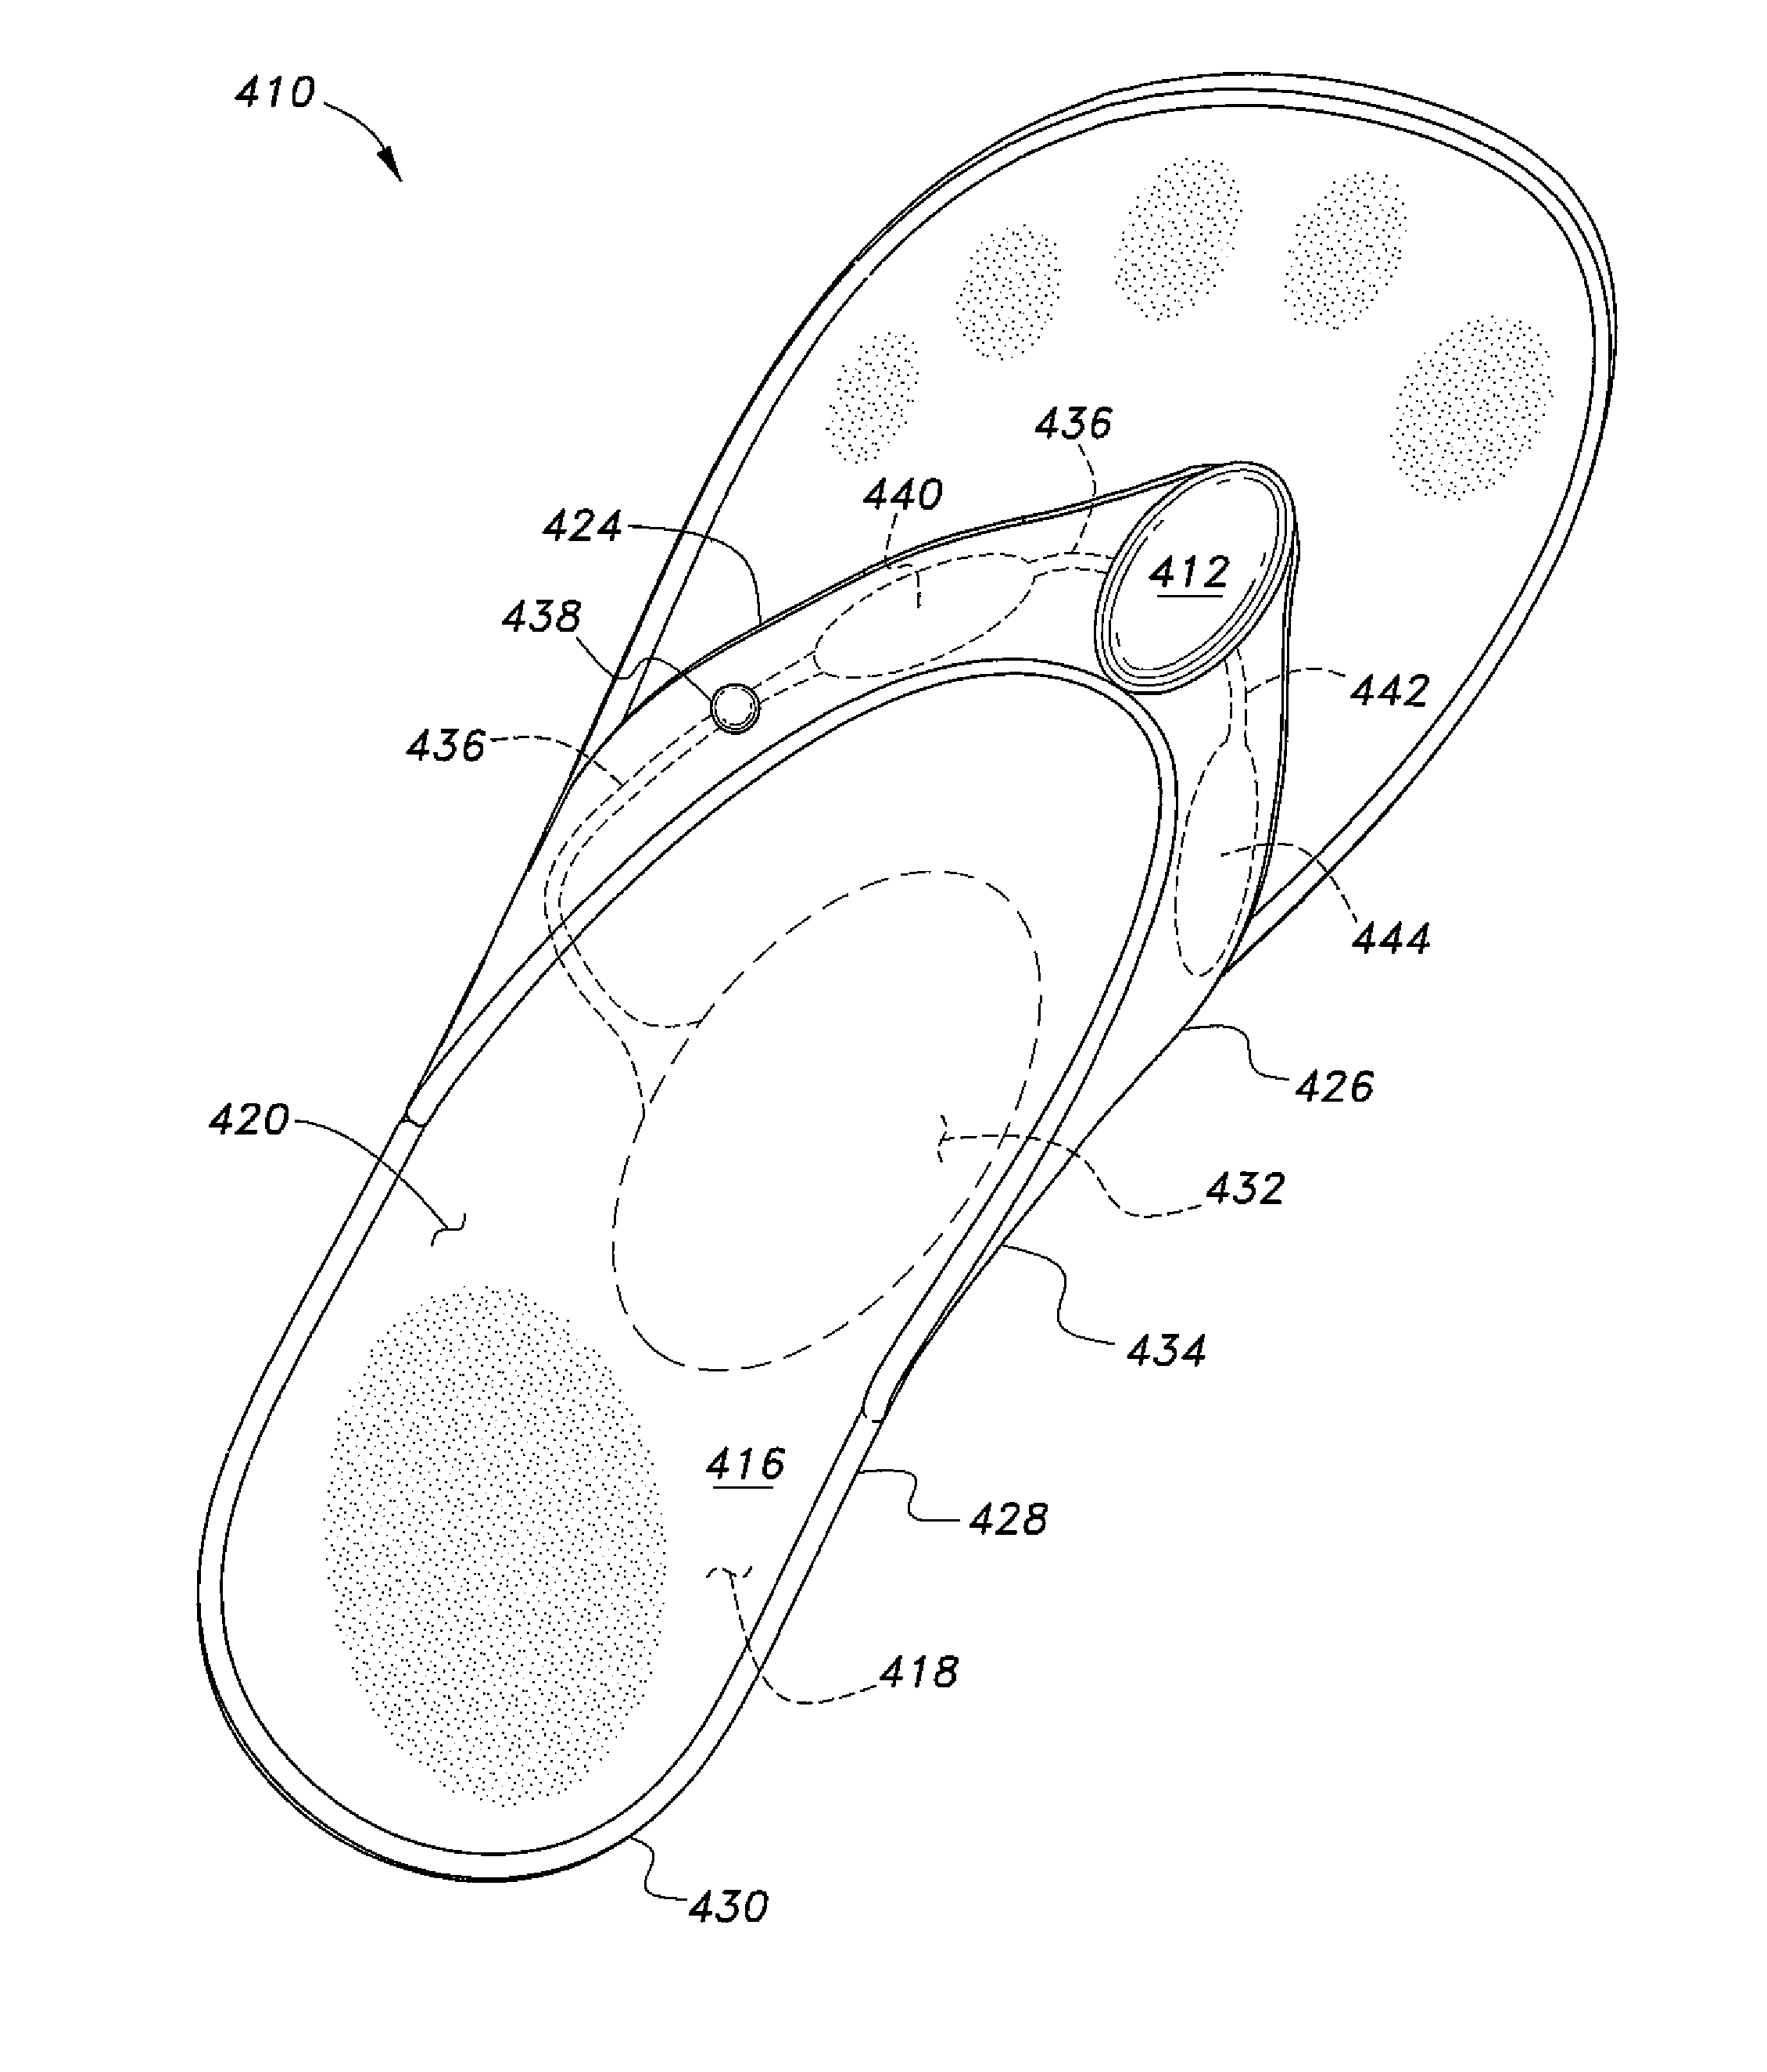 Sandal with pneumatic support